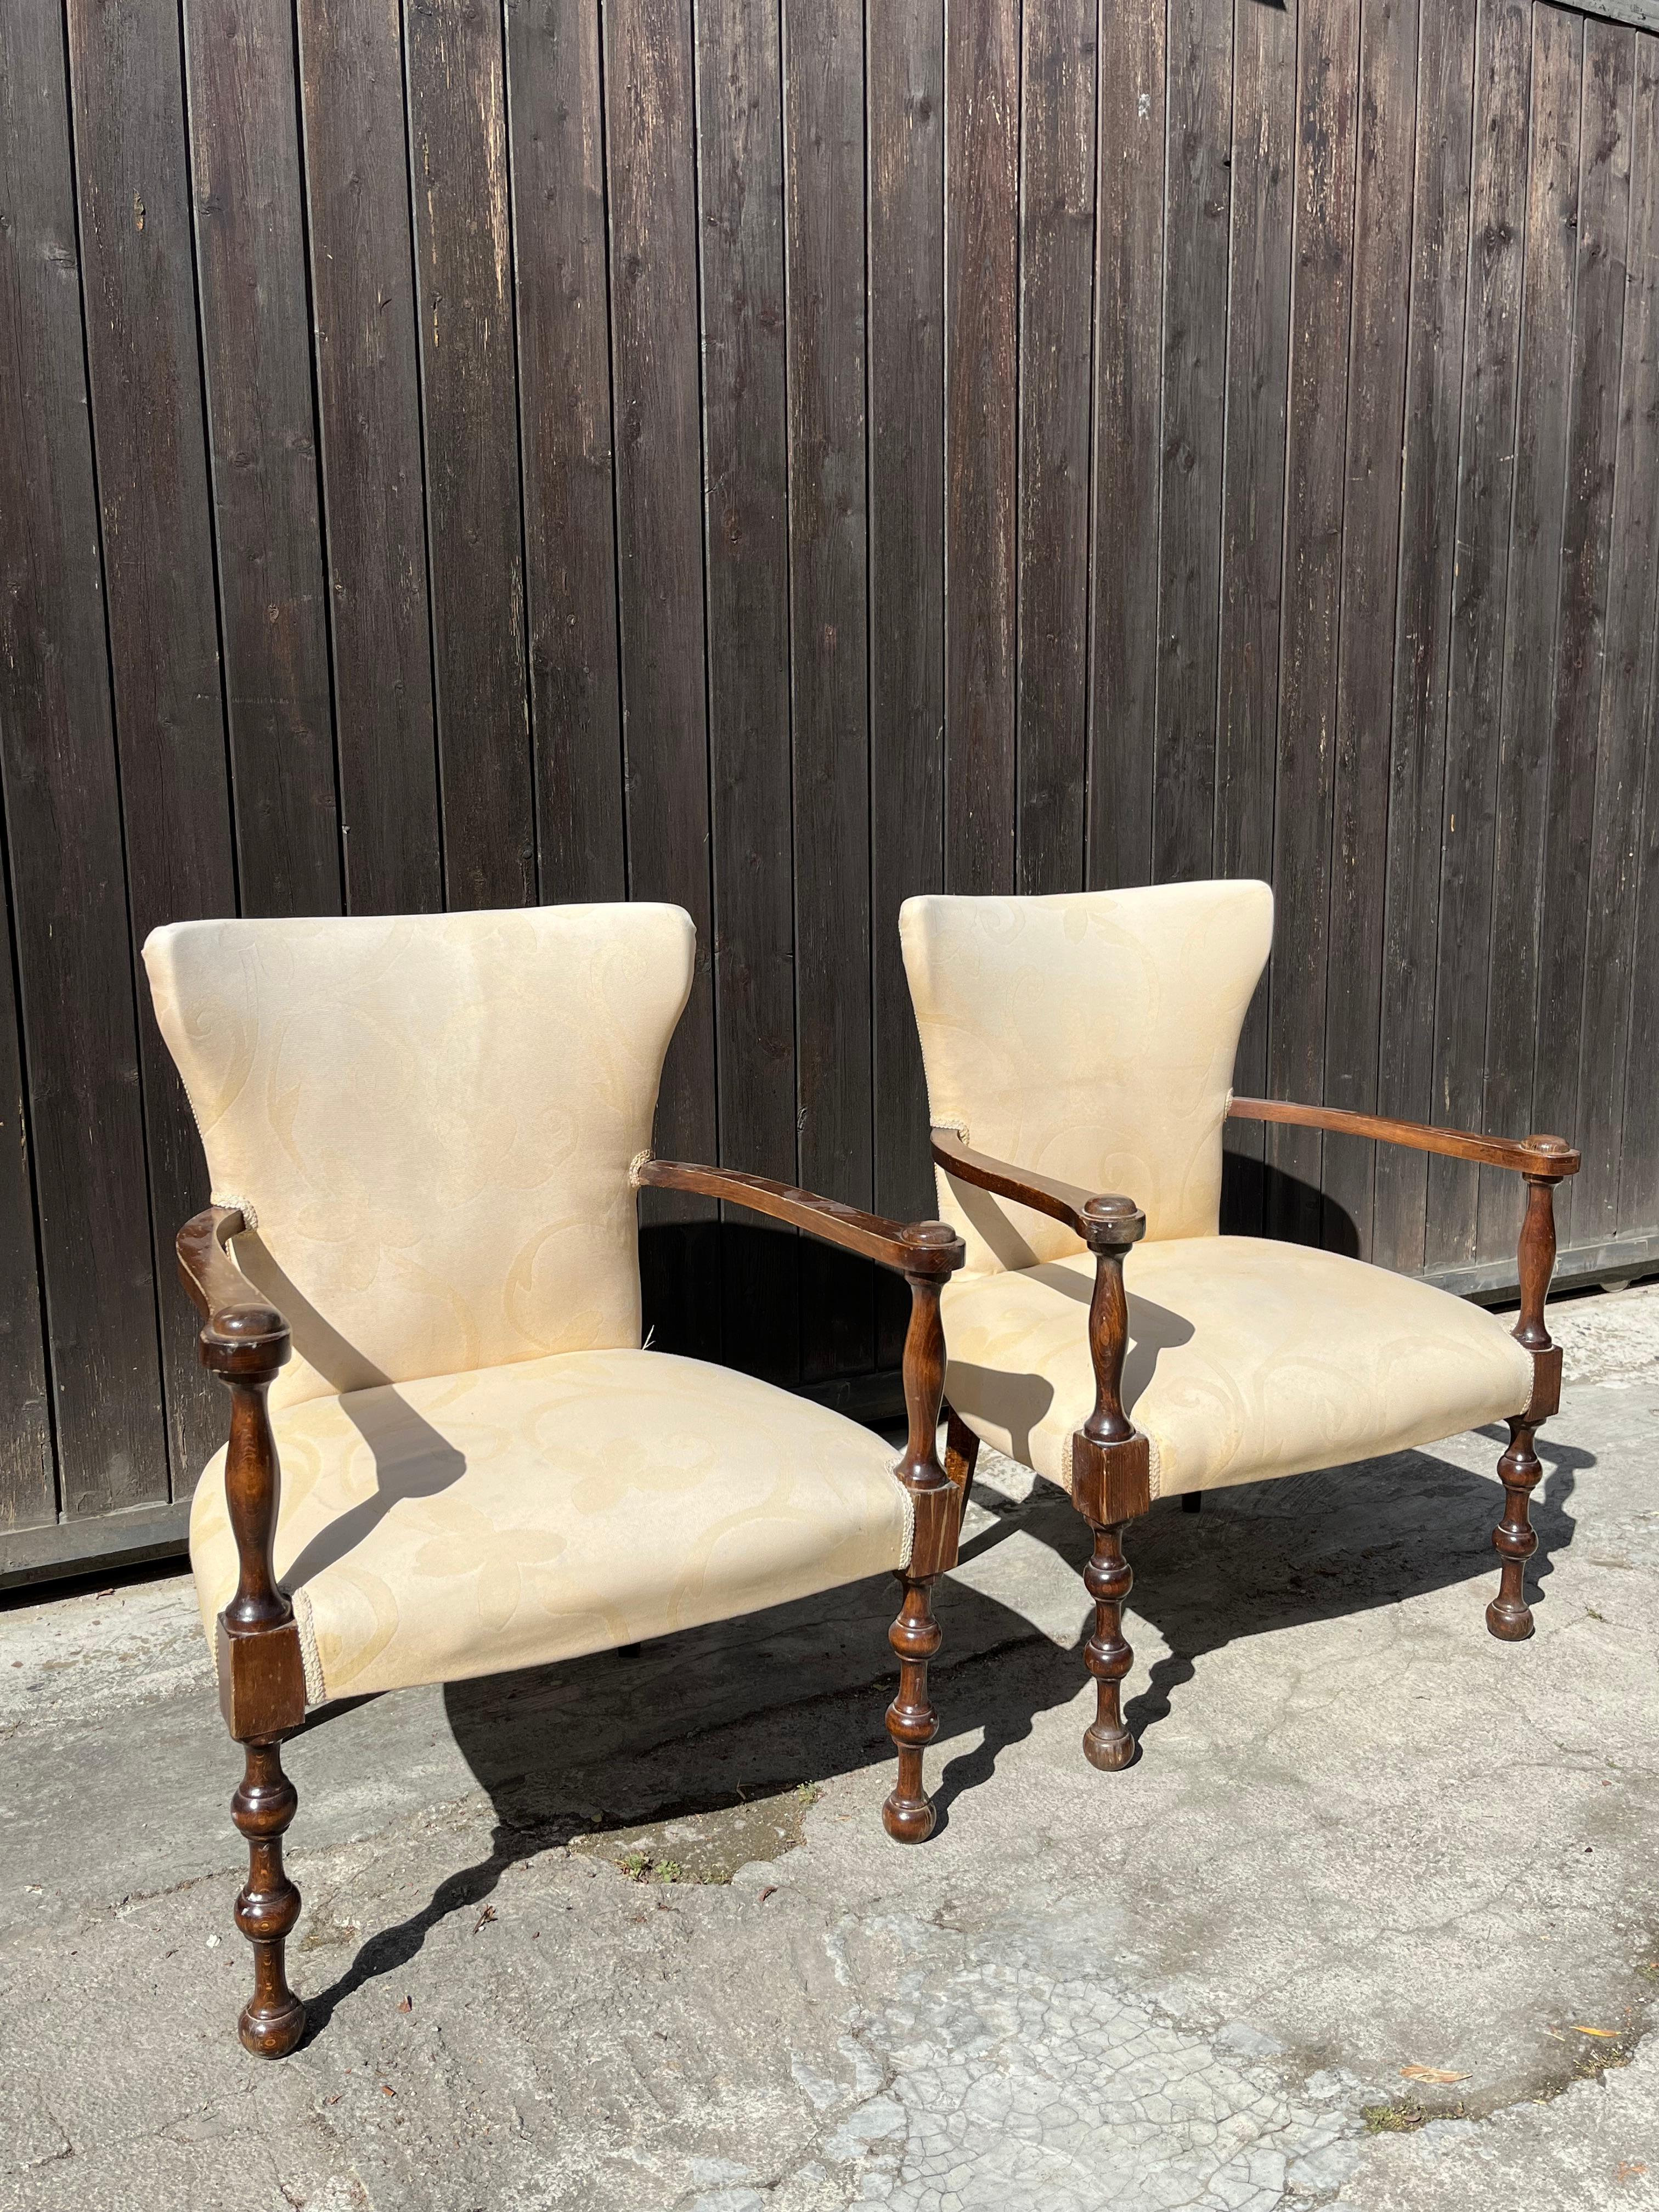 Set of 2 Mid-Century 1950s Italian armchairs, 1950s.
Intact structure, original fabric covering with signs of aging.